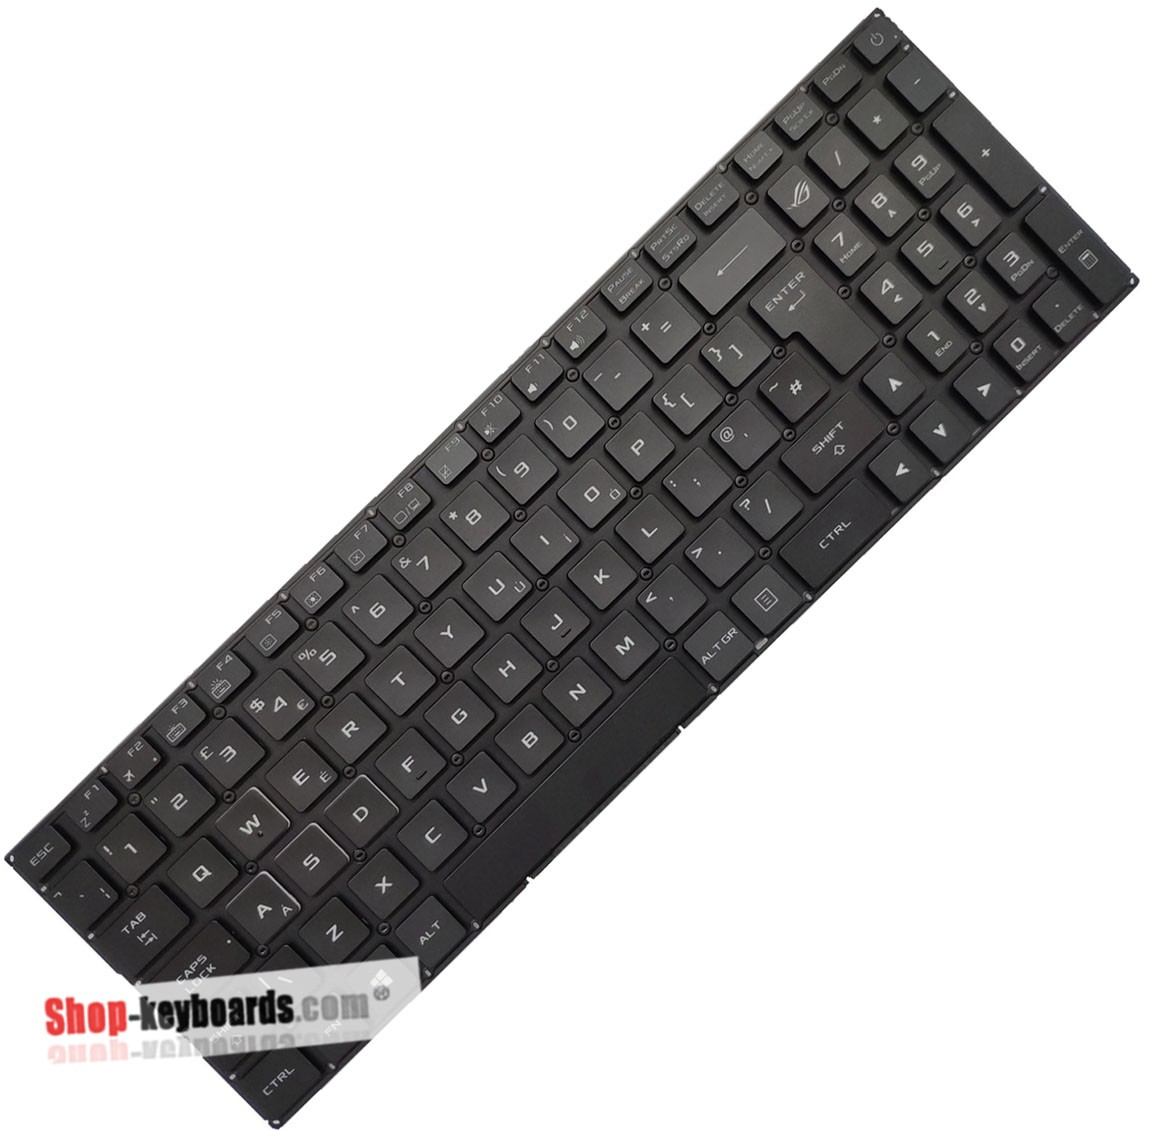 Asus 0KNB0-6618WB00  Keyboard replacement